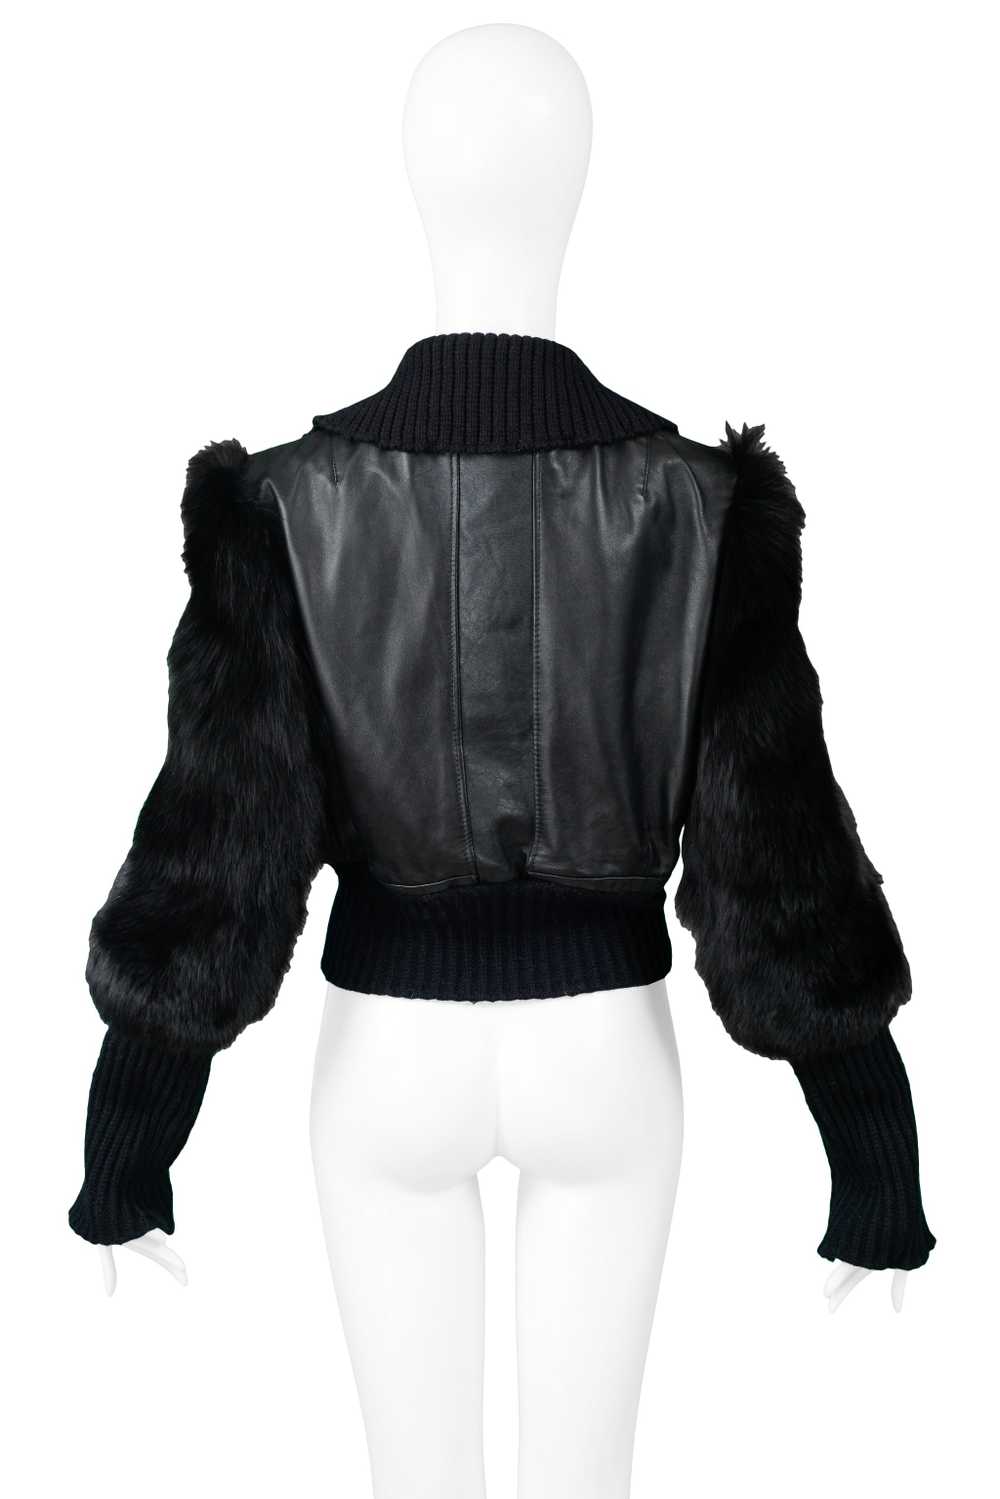 GUCCI BY TOM FORD LEATHER & FOX FUR JACKET 2003 - image 2